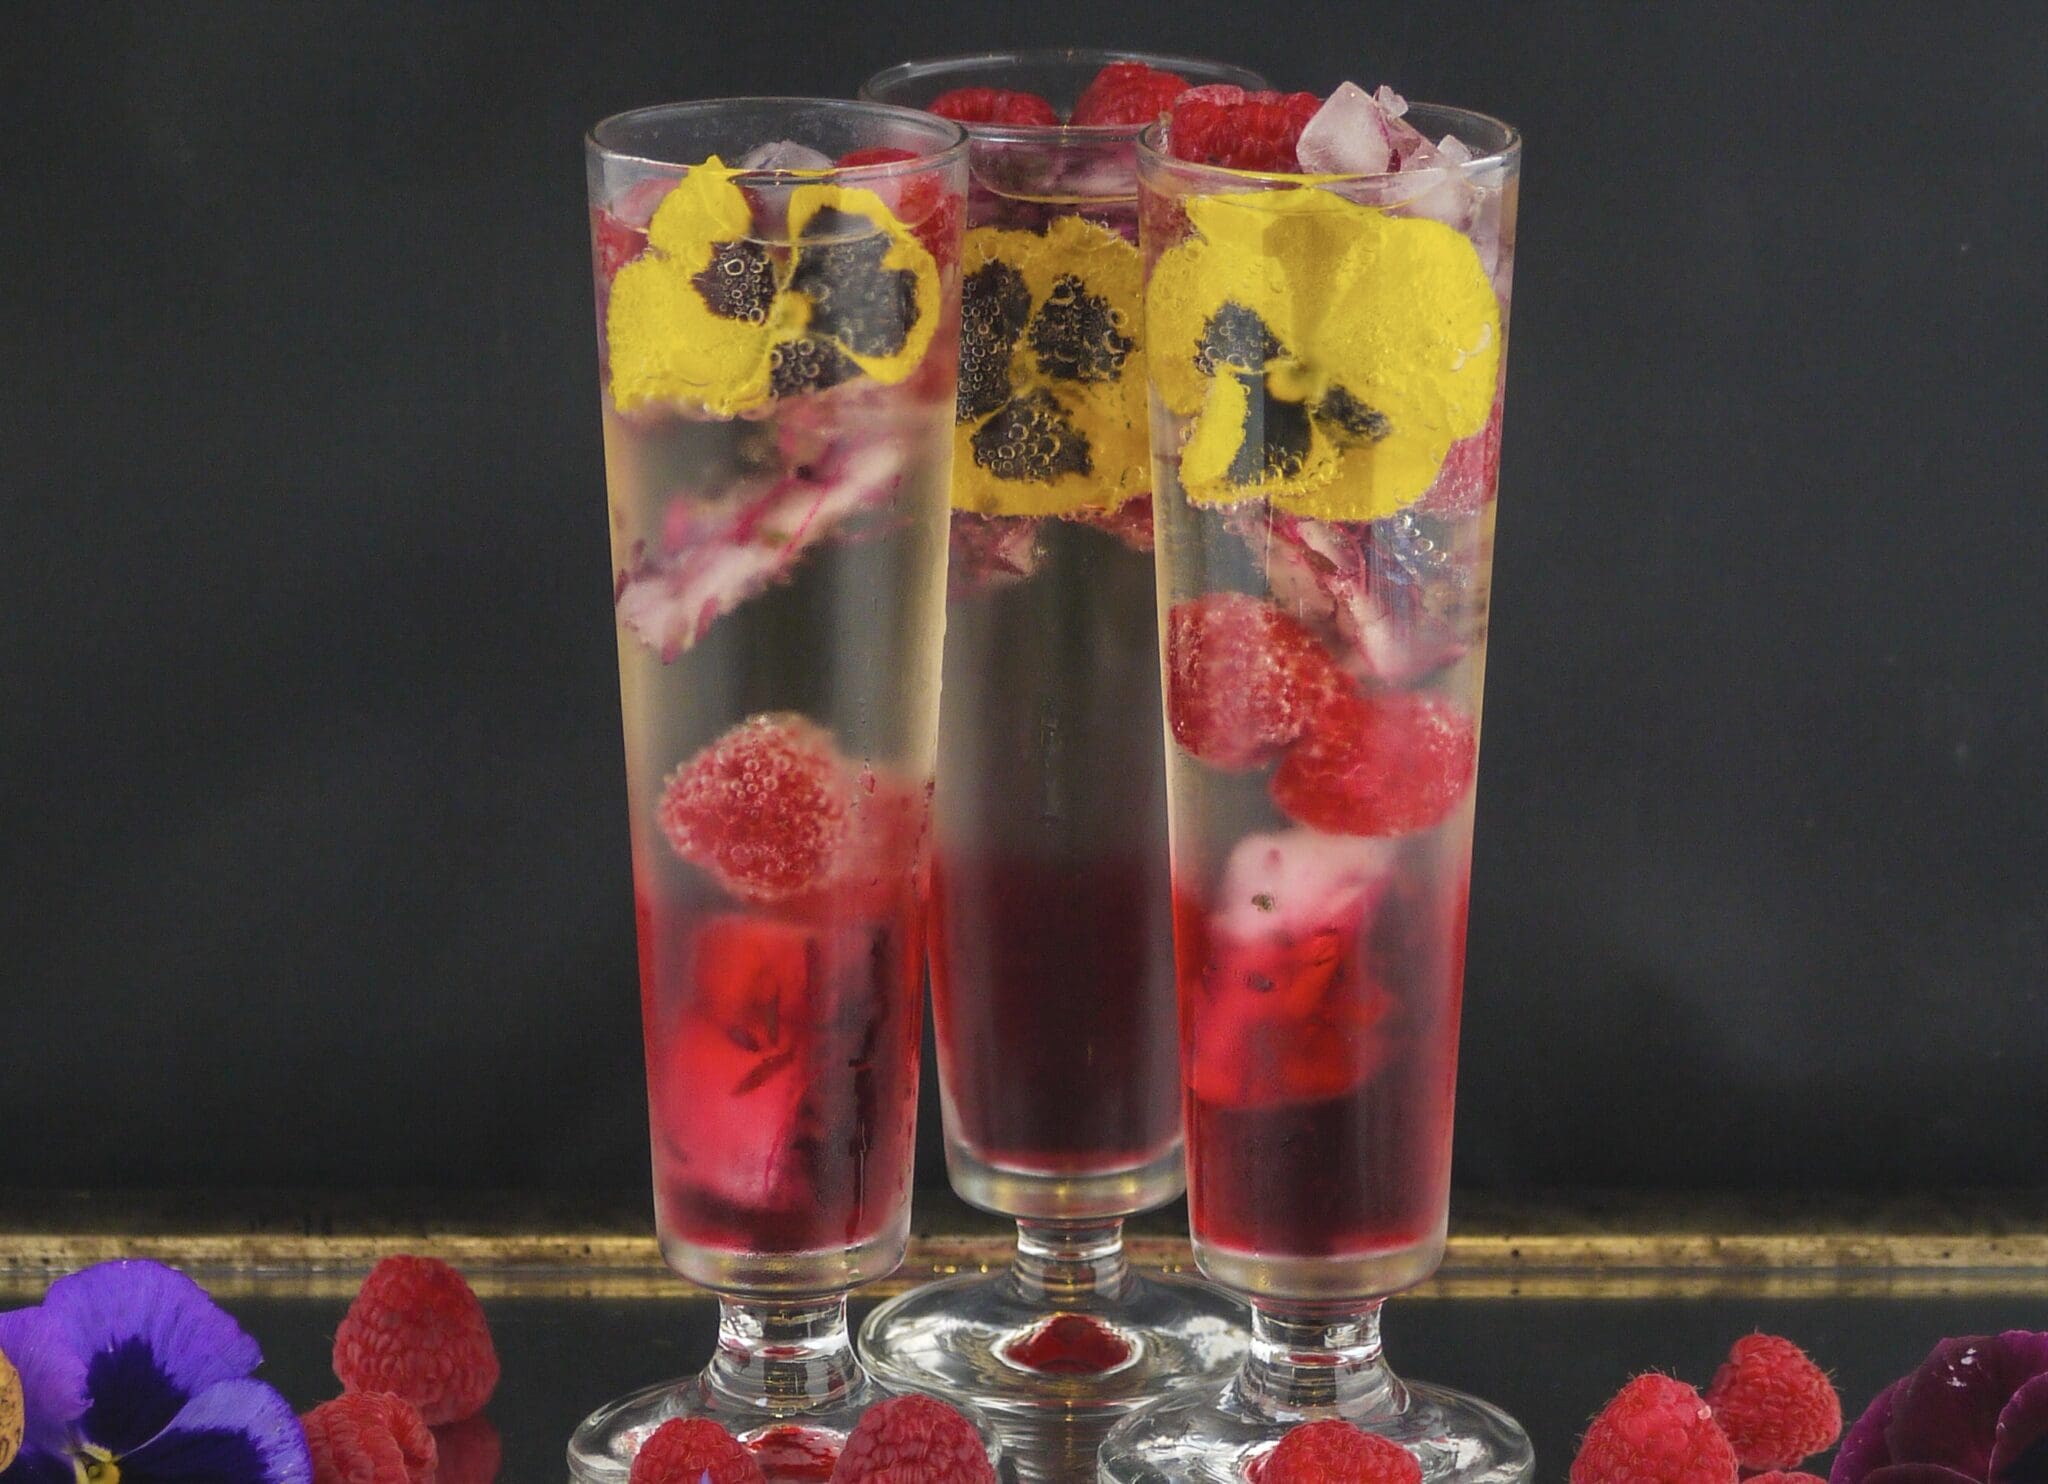 Three glasses with raspberries and pansies in them.